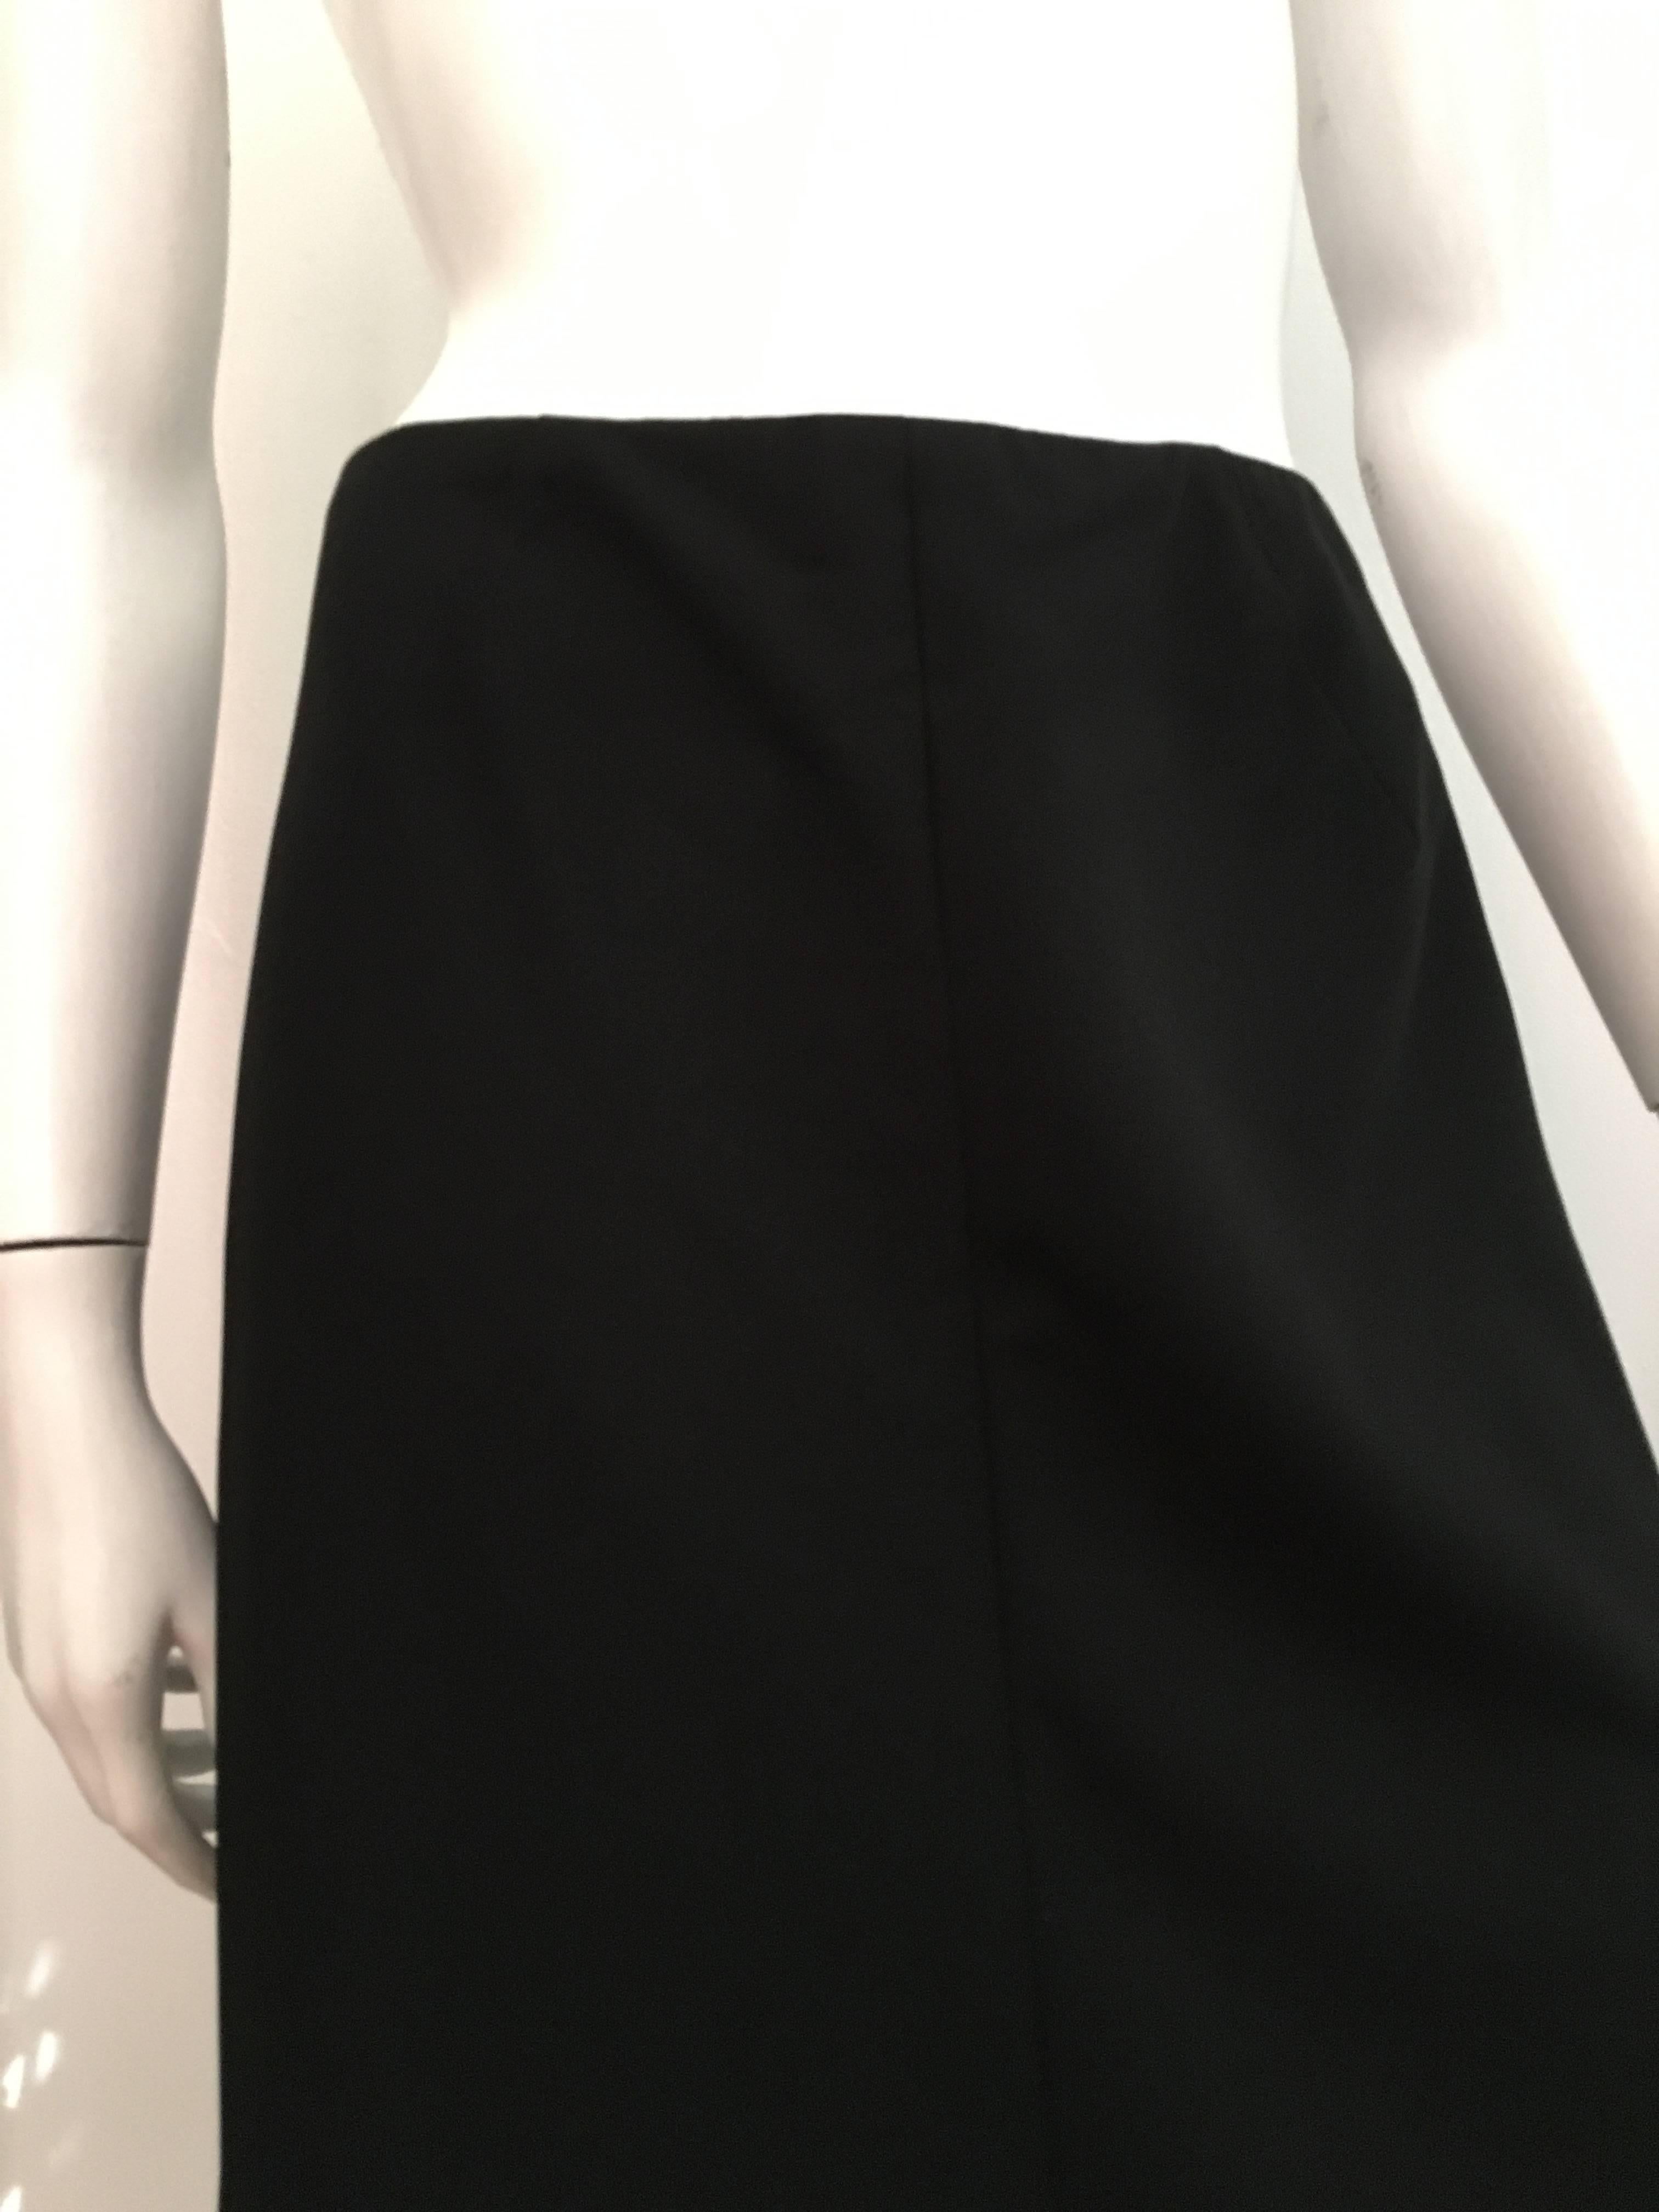 Chanel 1980s long black wool skirt is a vintage size 40 but fits like a modern USA size 6.  Please use your tape measure to properly measure your body so you know this will fit the way Coco wanted it to..  Skirt is not lined. Classic long skirt